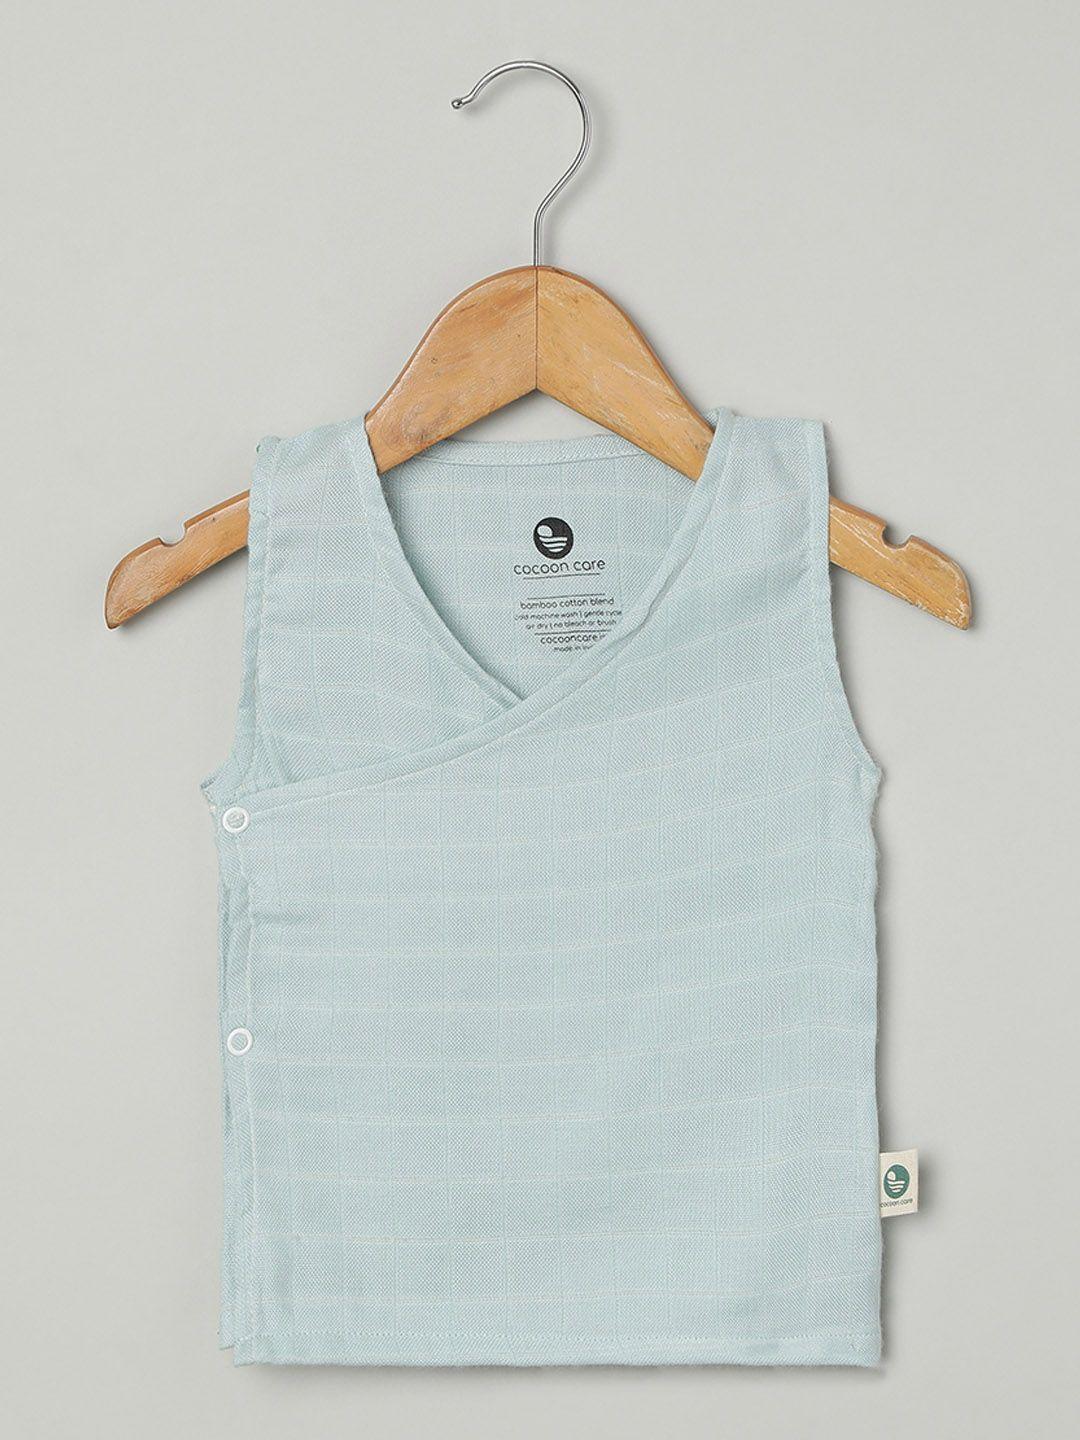 cocoon care infant printed soft bamboo basic vests